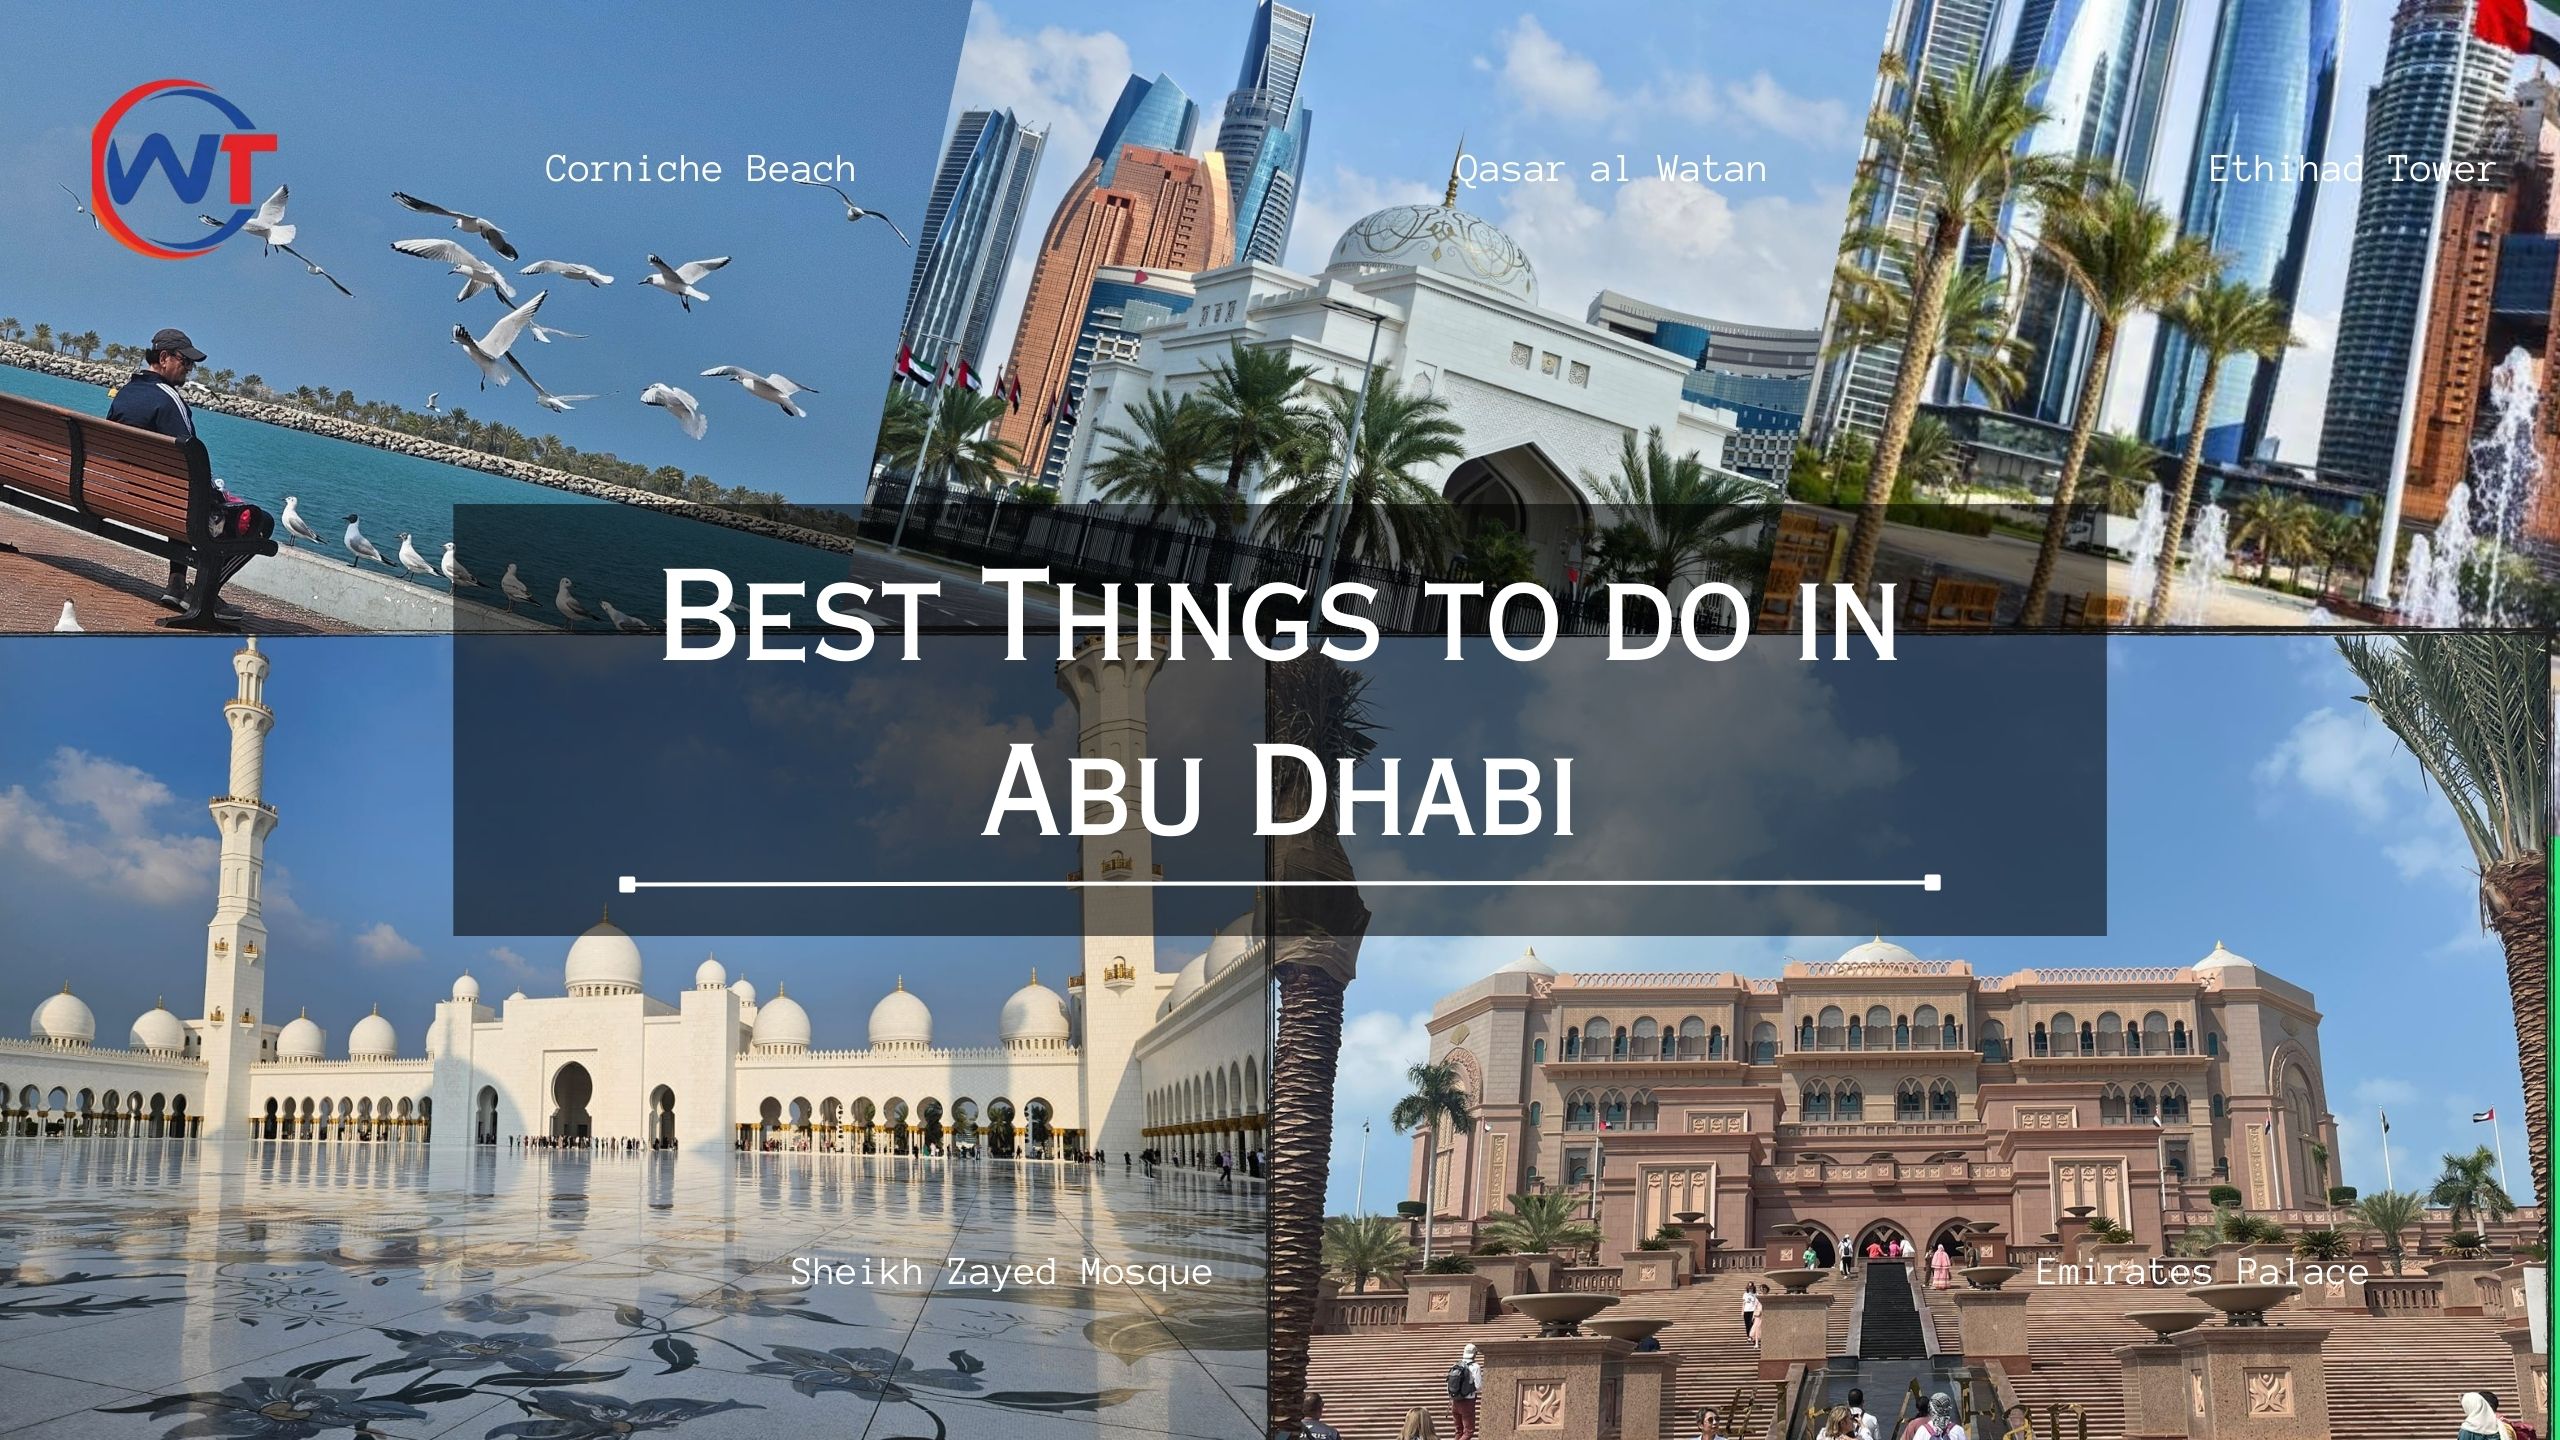 Explore the Best Things to Do in Abu Dhabi